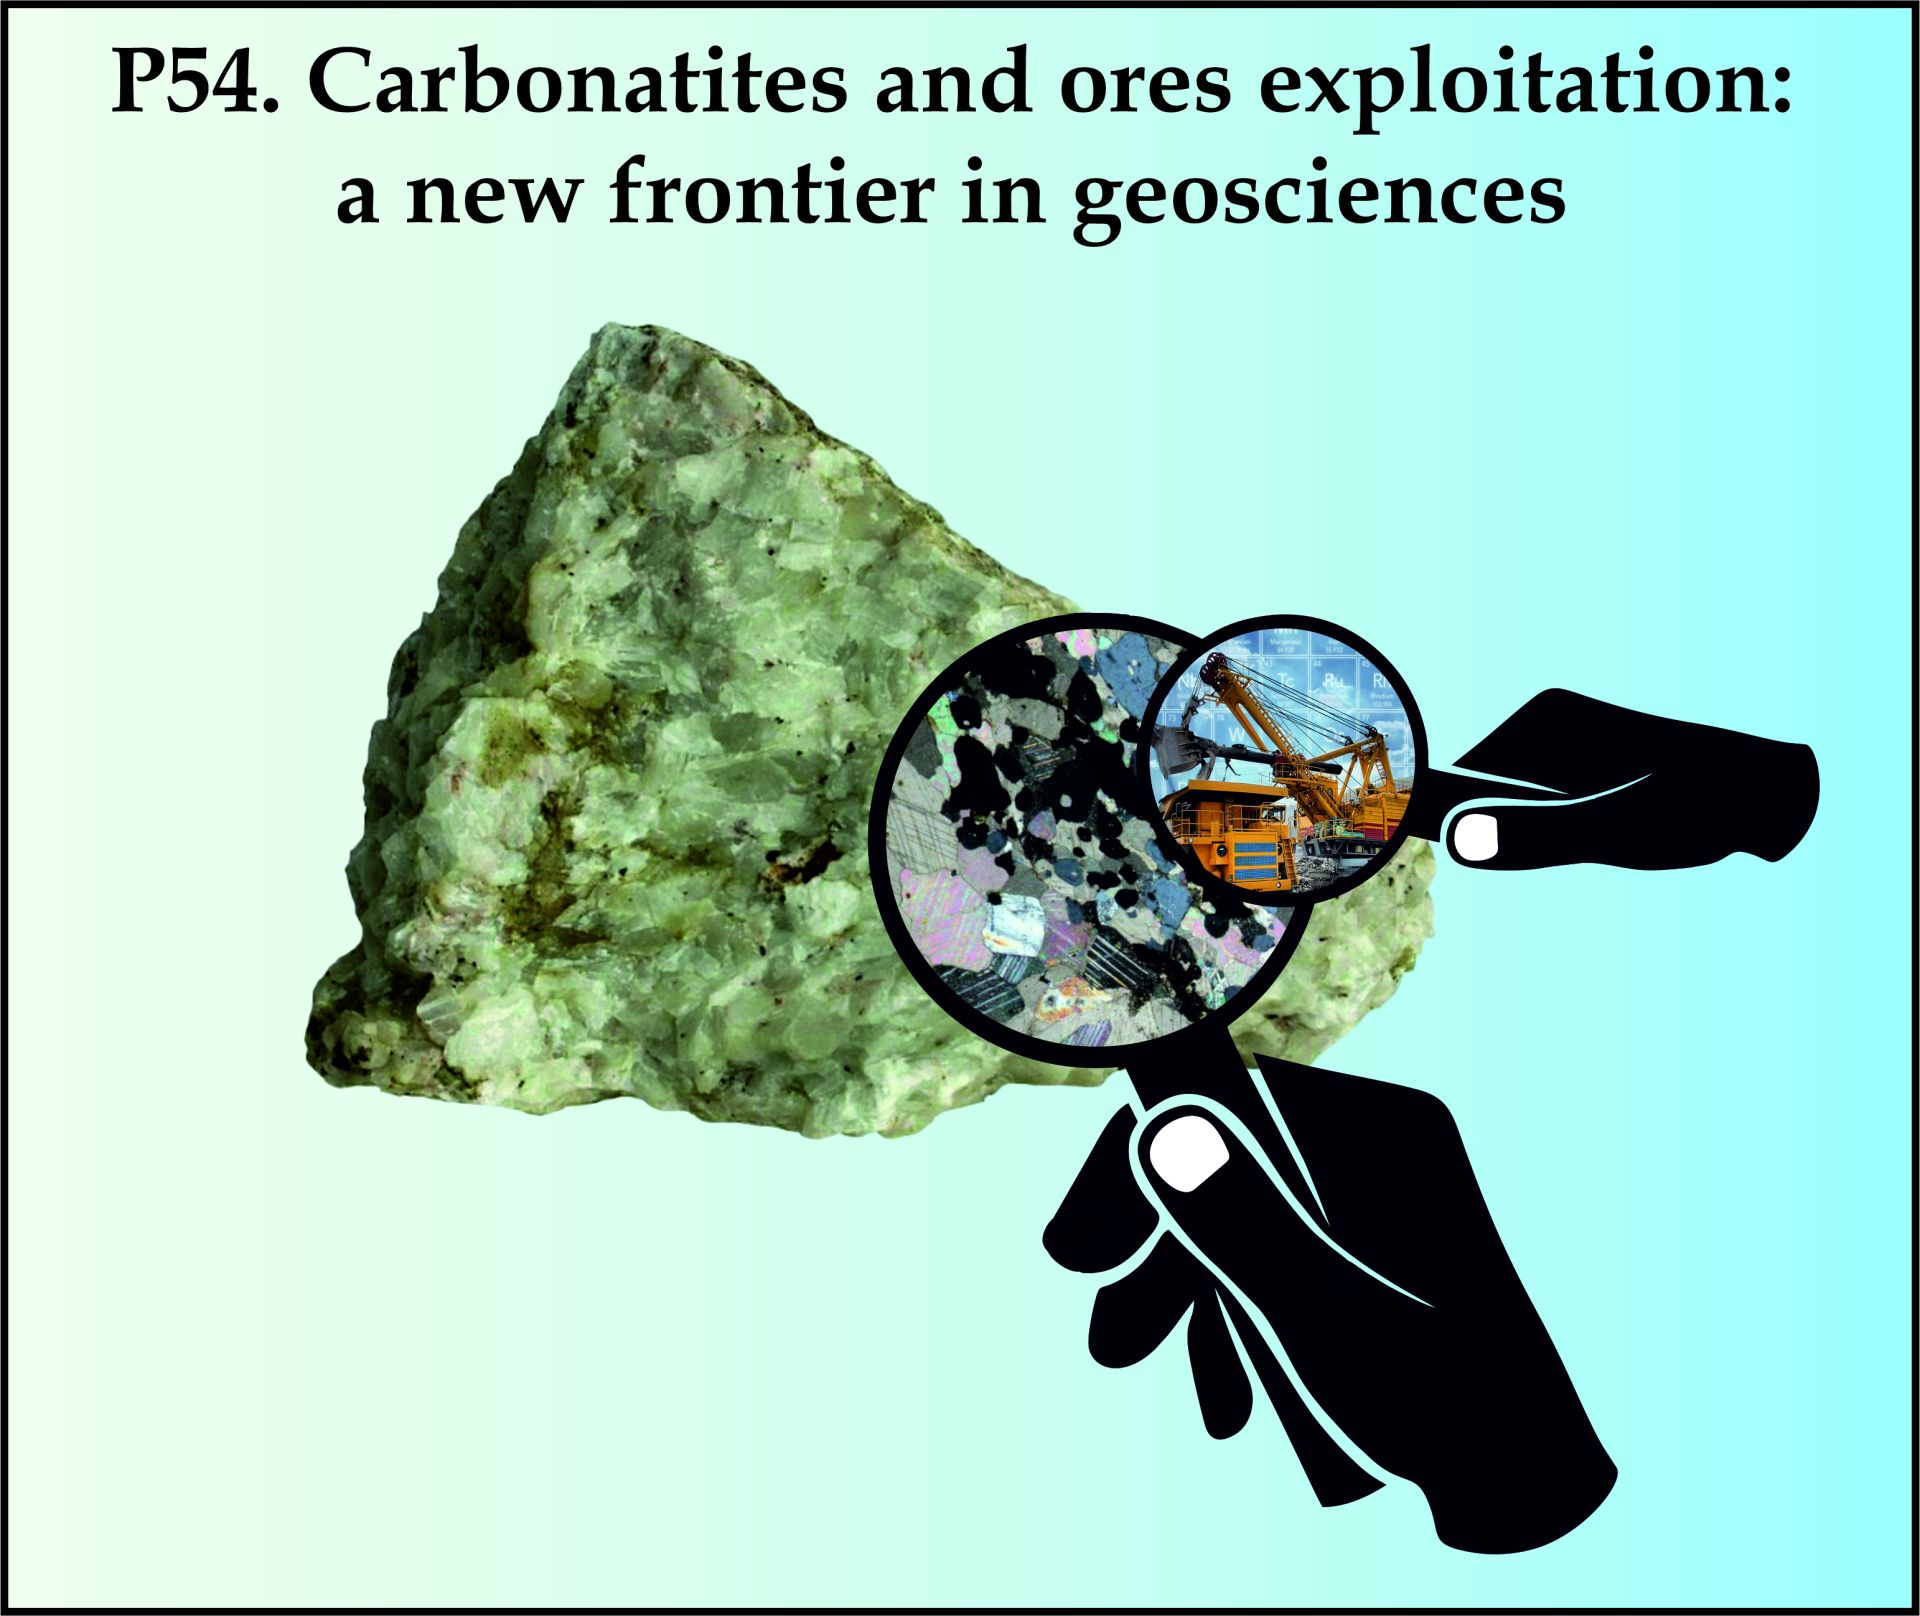 P54. Carbonatites and ores exploitation: a new frontier in geosciences